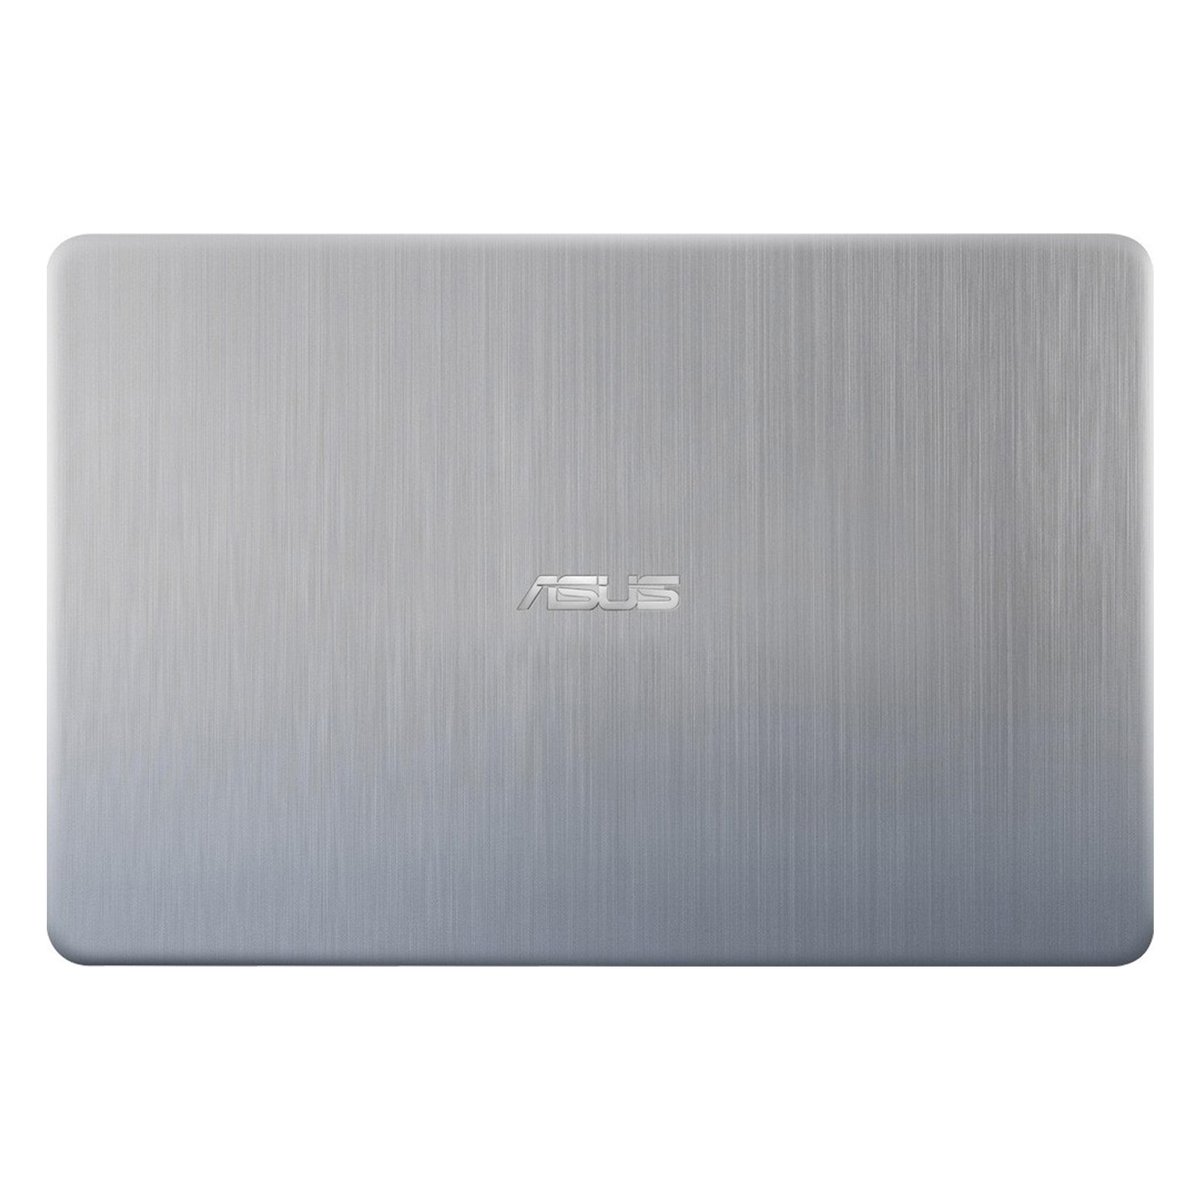 Asus Notebook X540UB-GQ1217T Core i3 Silver